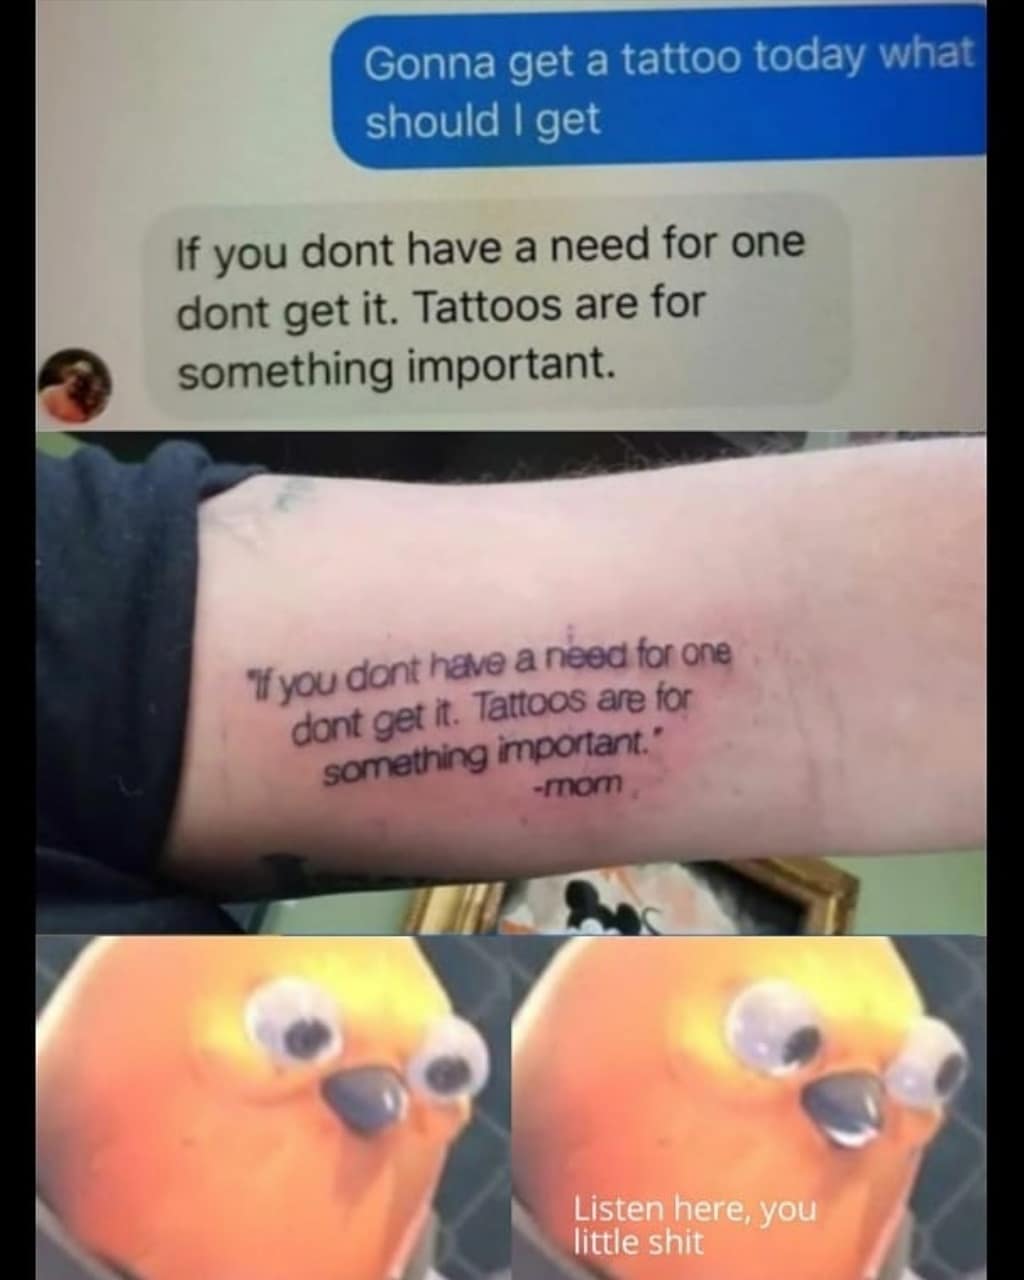 2020 and 2022 meme - Gonna get a tattoo today what should I get If you dont have a need for one dont get it. Tattoos are for something important. If you dont have a need for one dont get it. Tattoos are for something important." rom Listen here, you littl